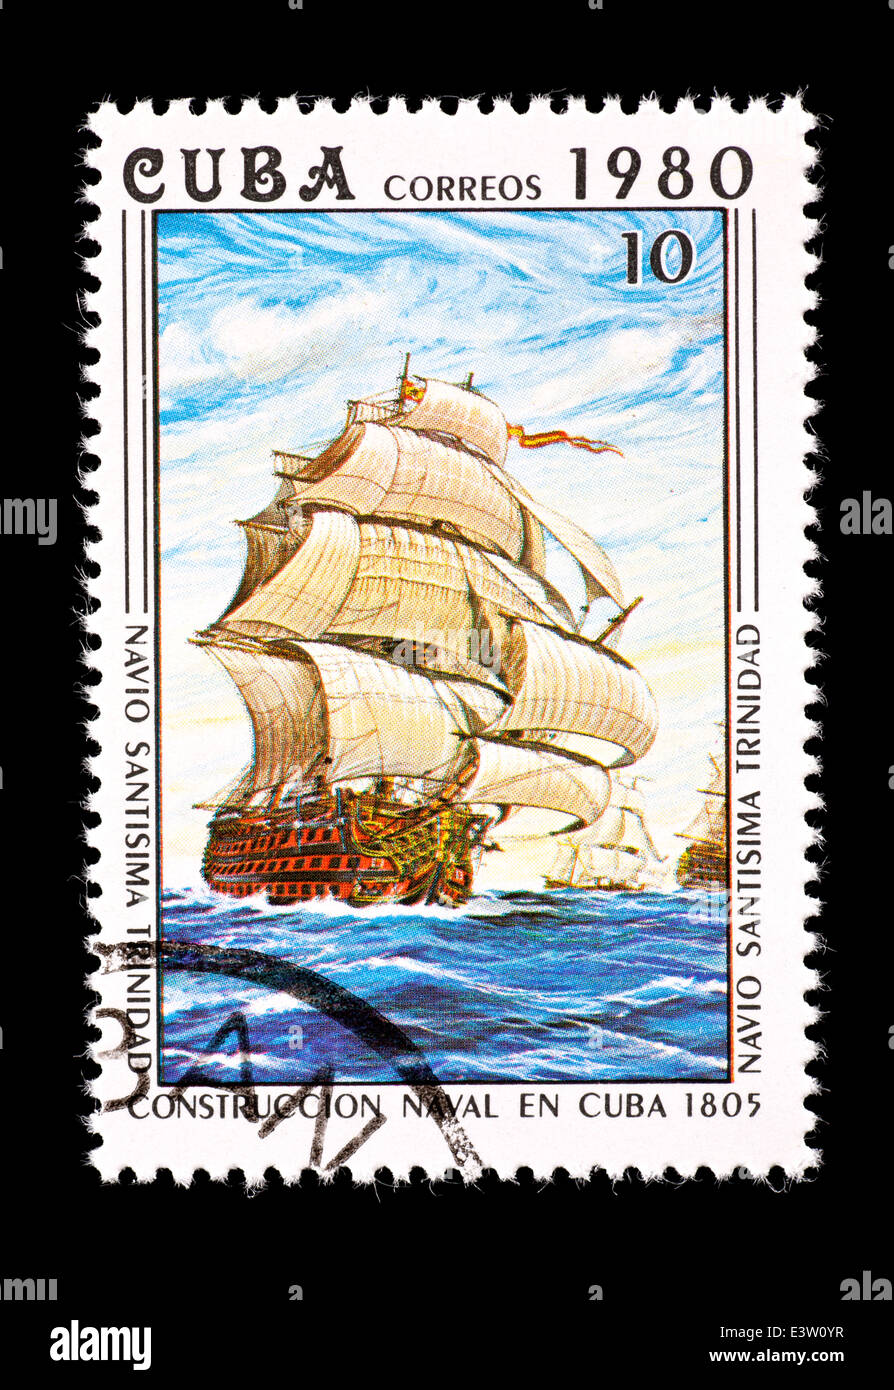 Postage stamp from Cuba depicting the Cuban naval vessel Santisima Trinidad. Stock Photo